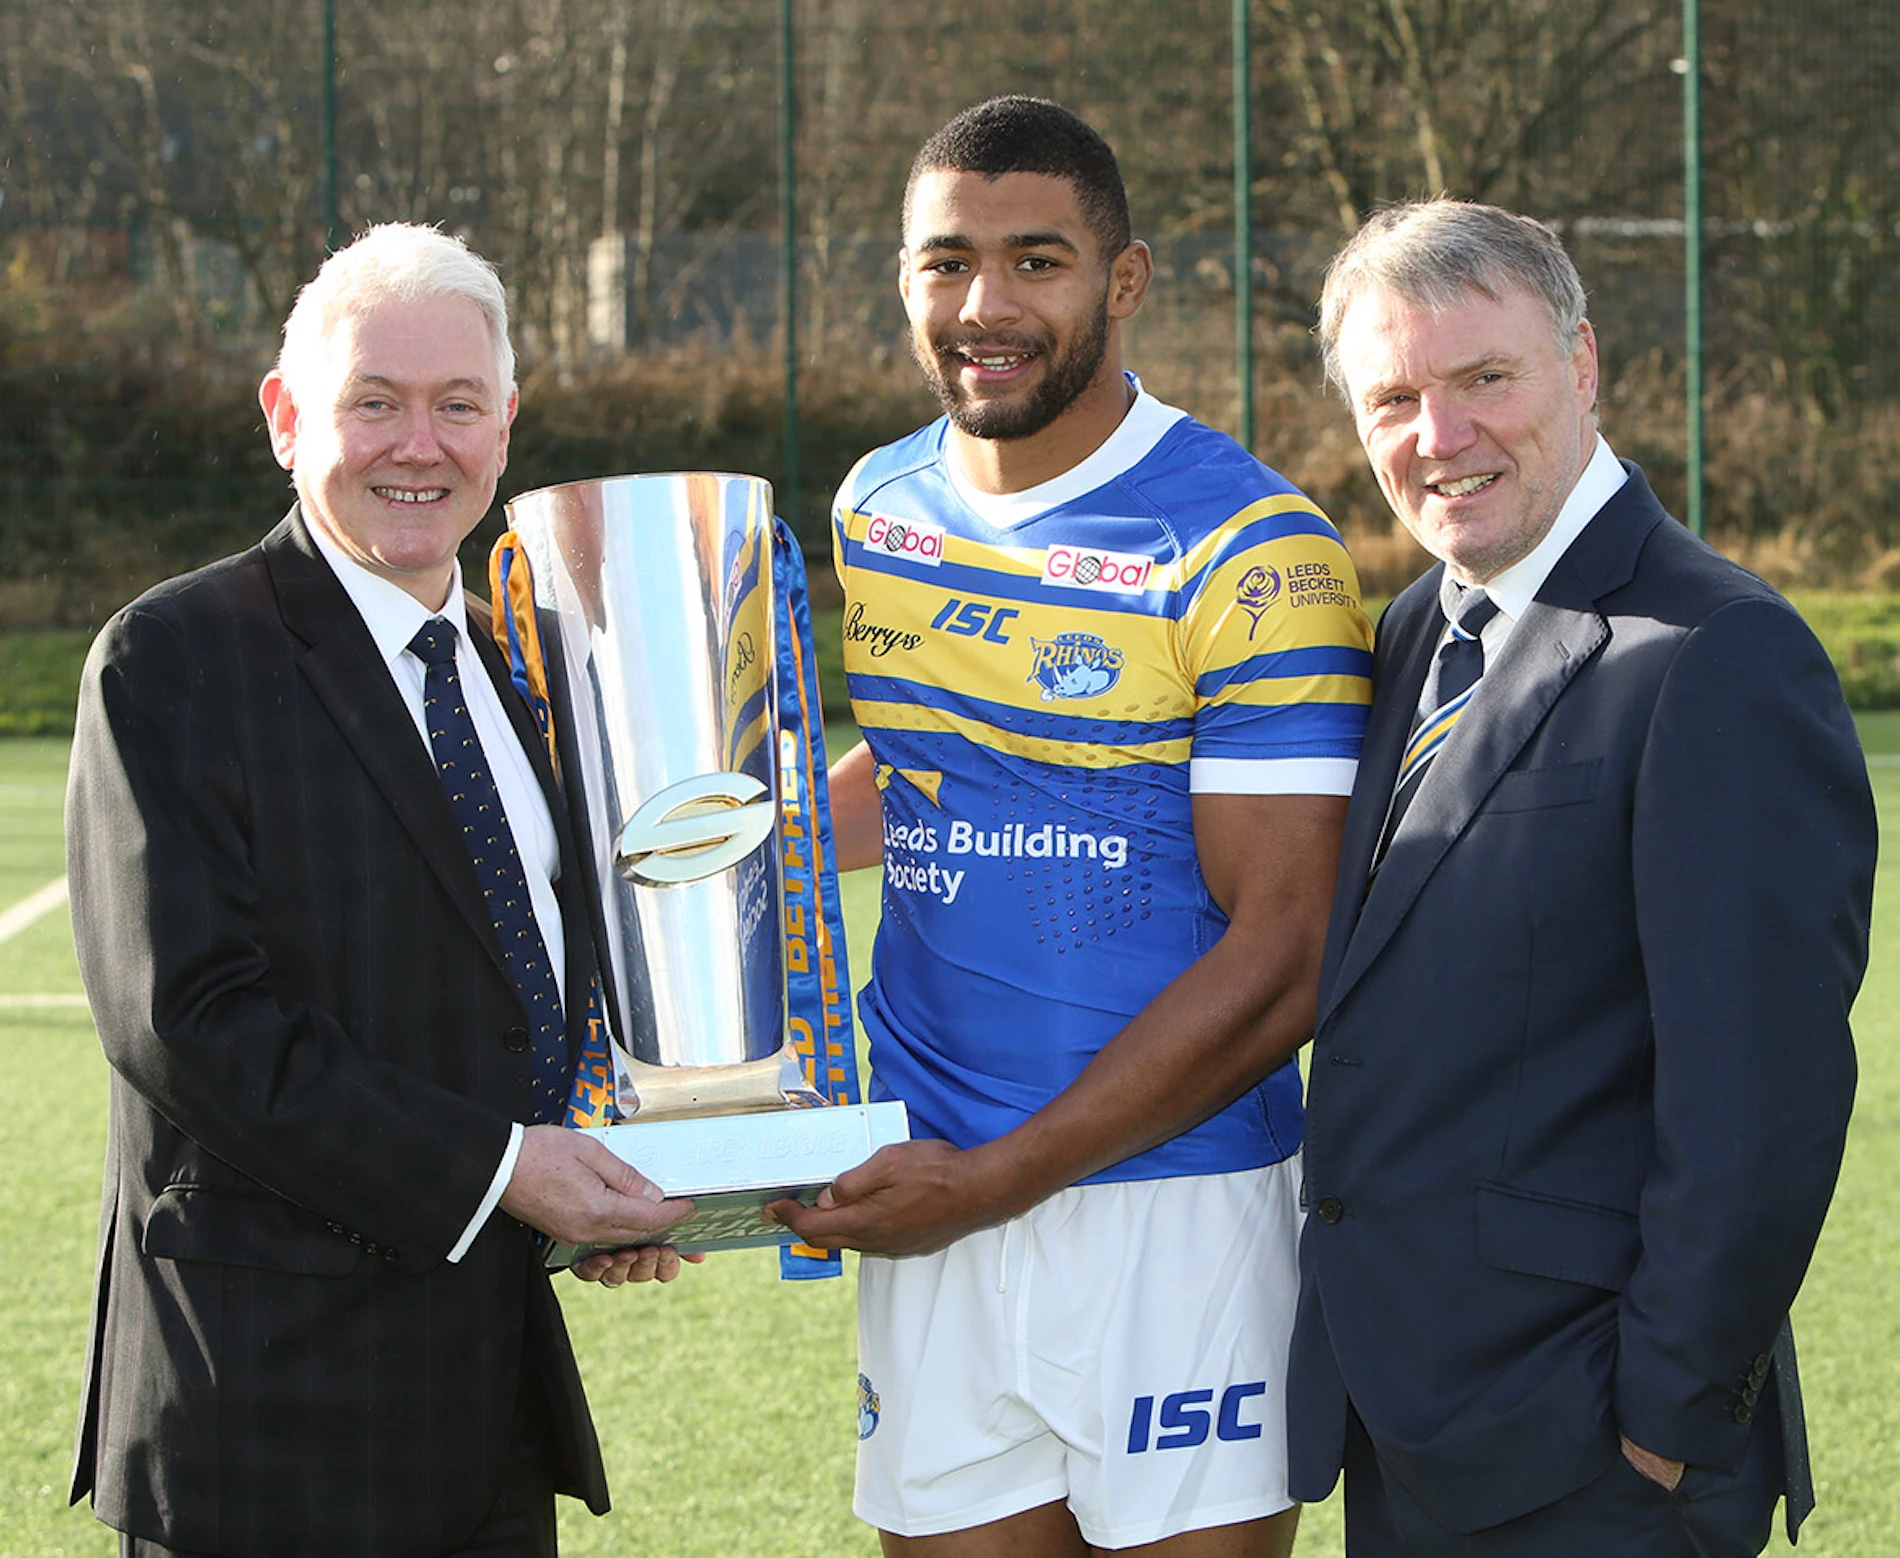 Peter Hill, Leeds Building Society Chief Executive Officer, is pictured with the Super League trophy, with new Rhinos team captain Kallum Watkins and Gary Hetherington, Leeds Rhinos Chief Executive.